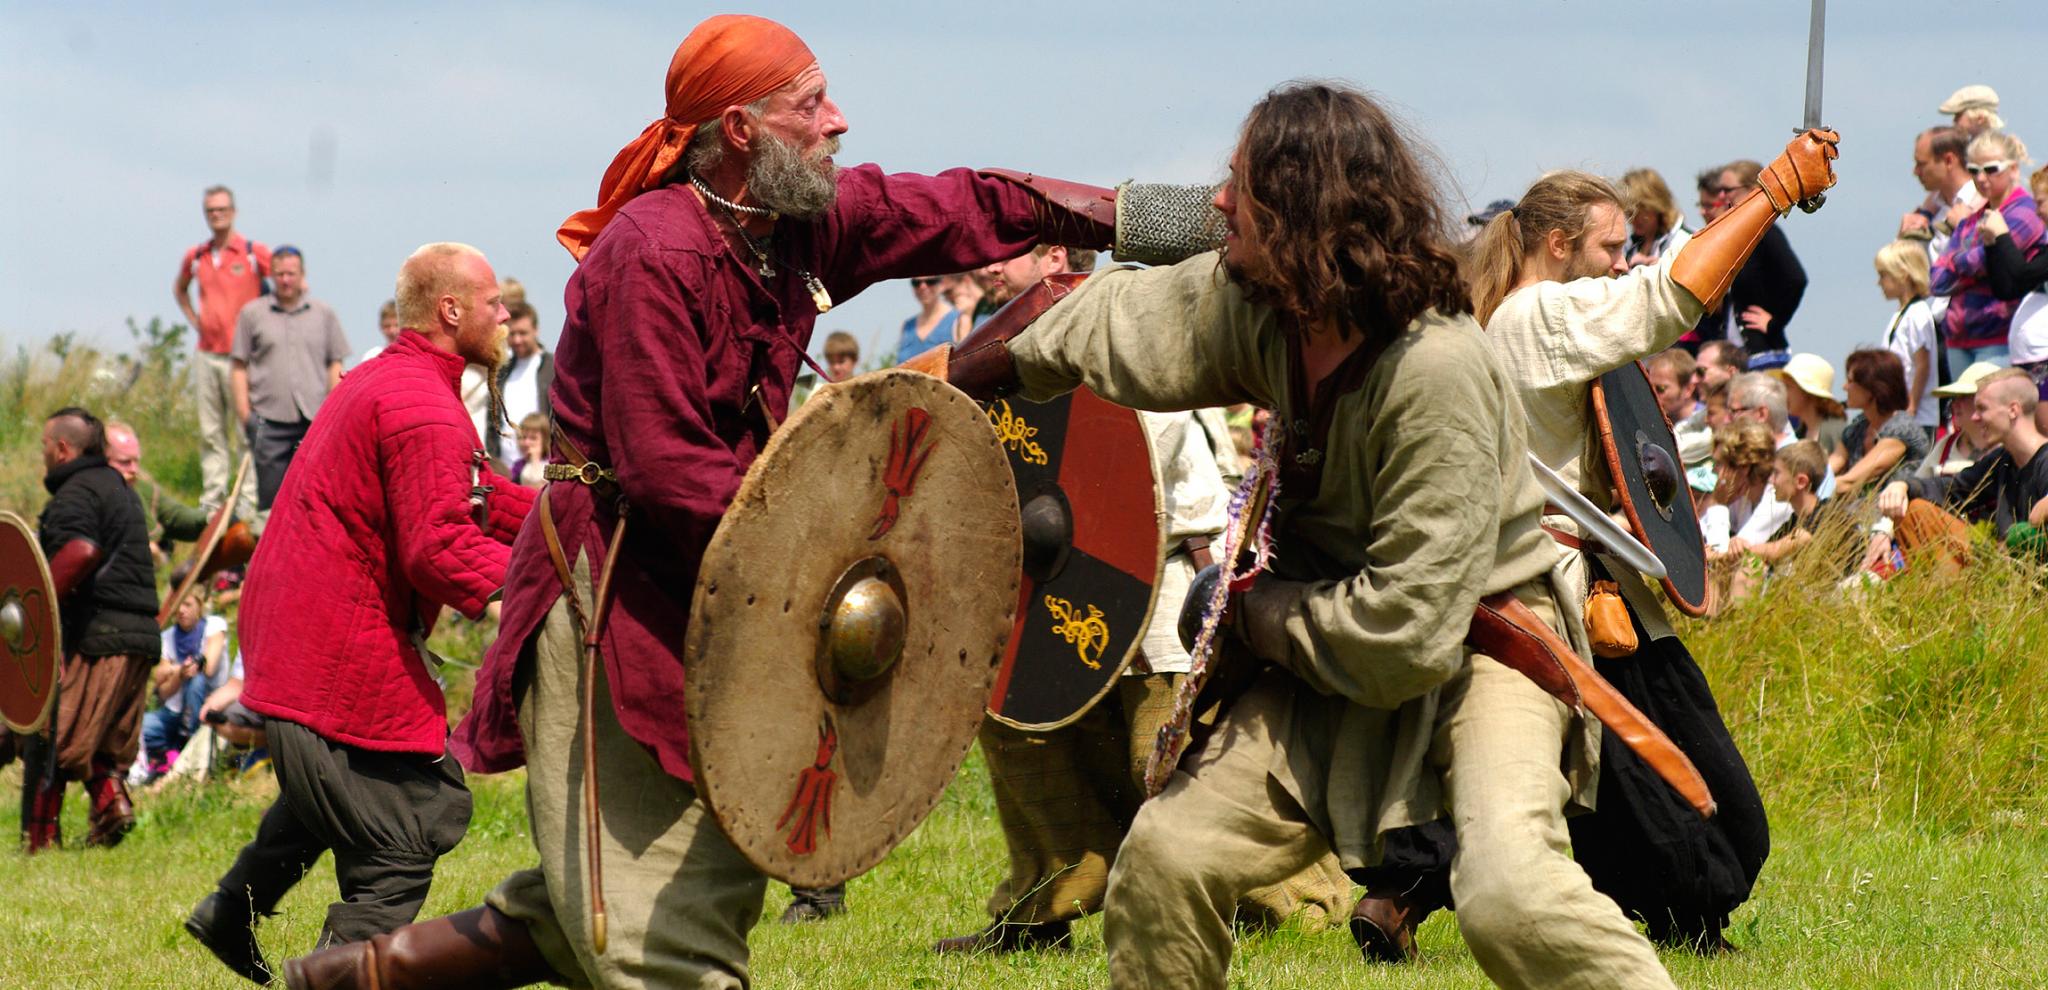 Vikings with swords and shields reconstruct a Viking battle